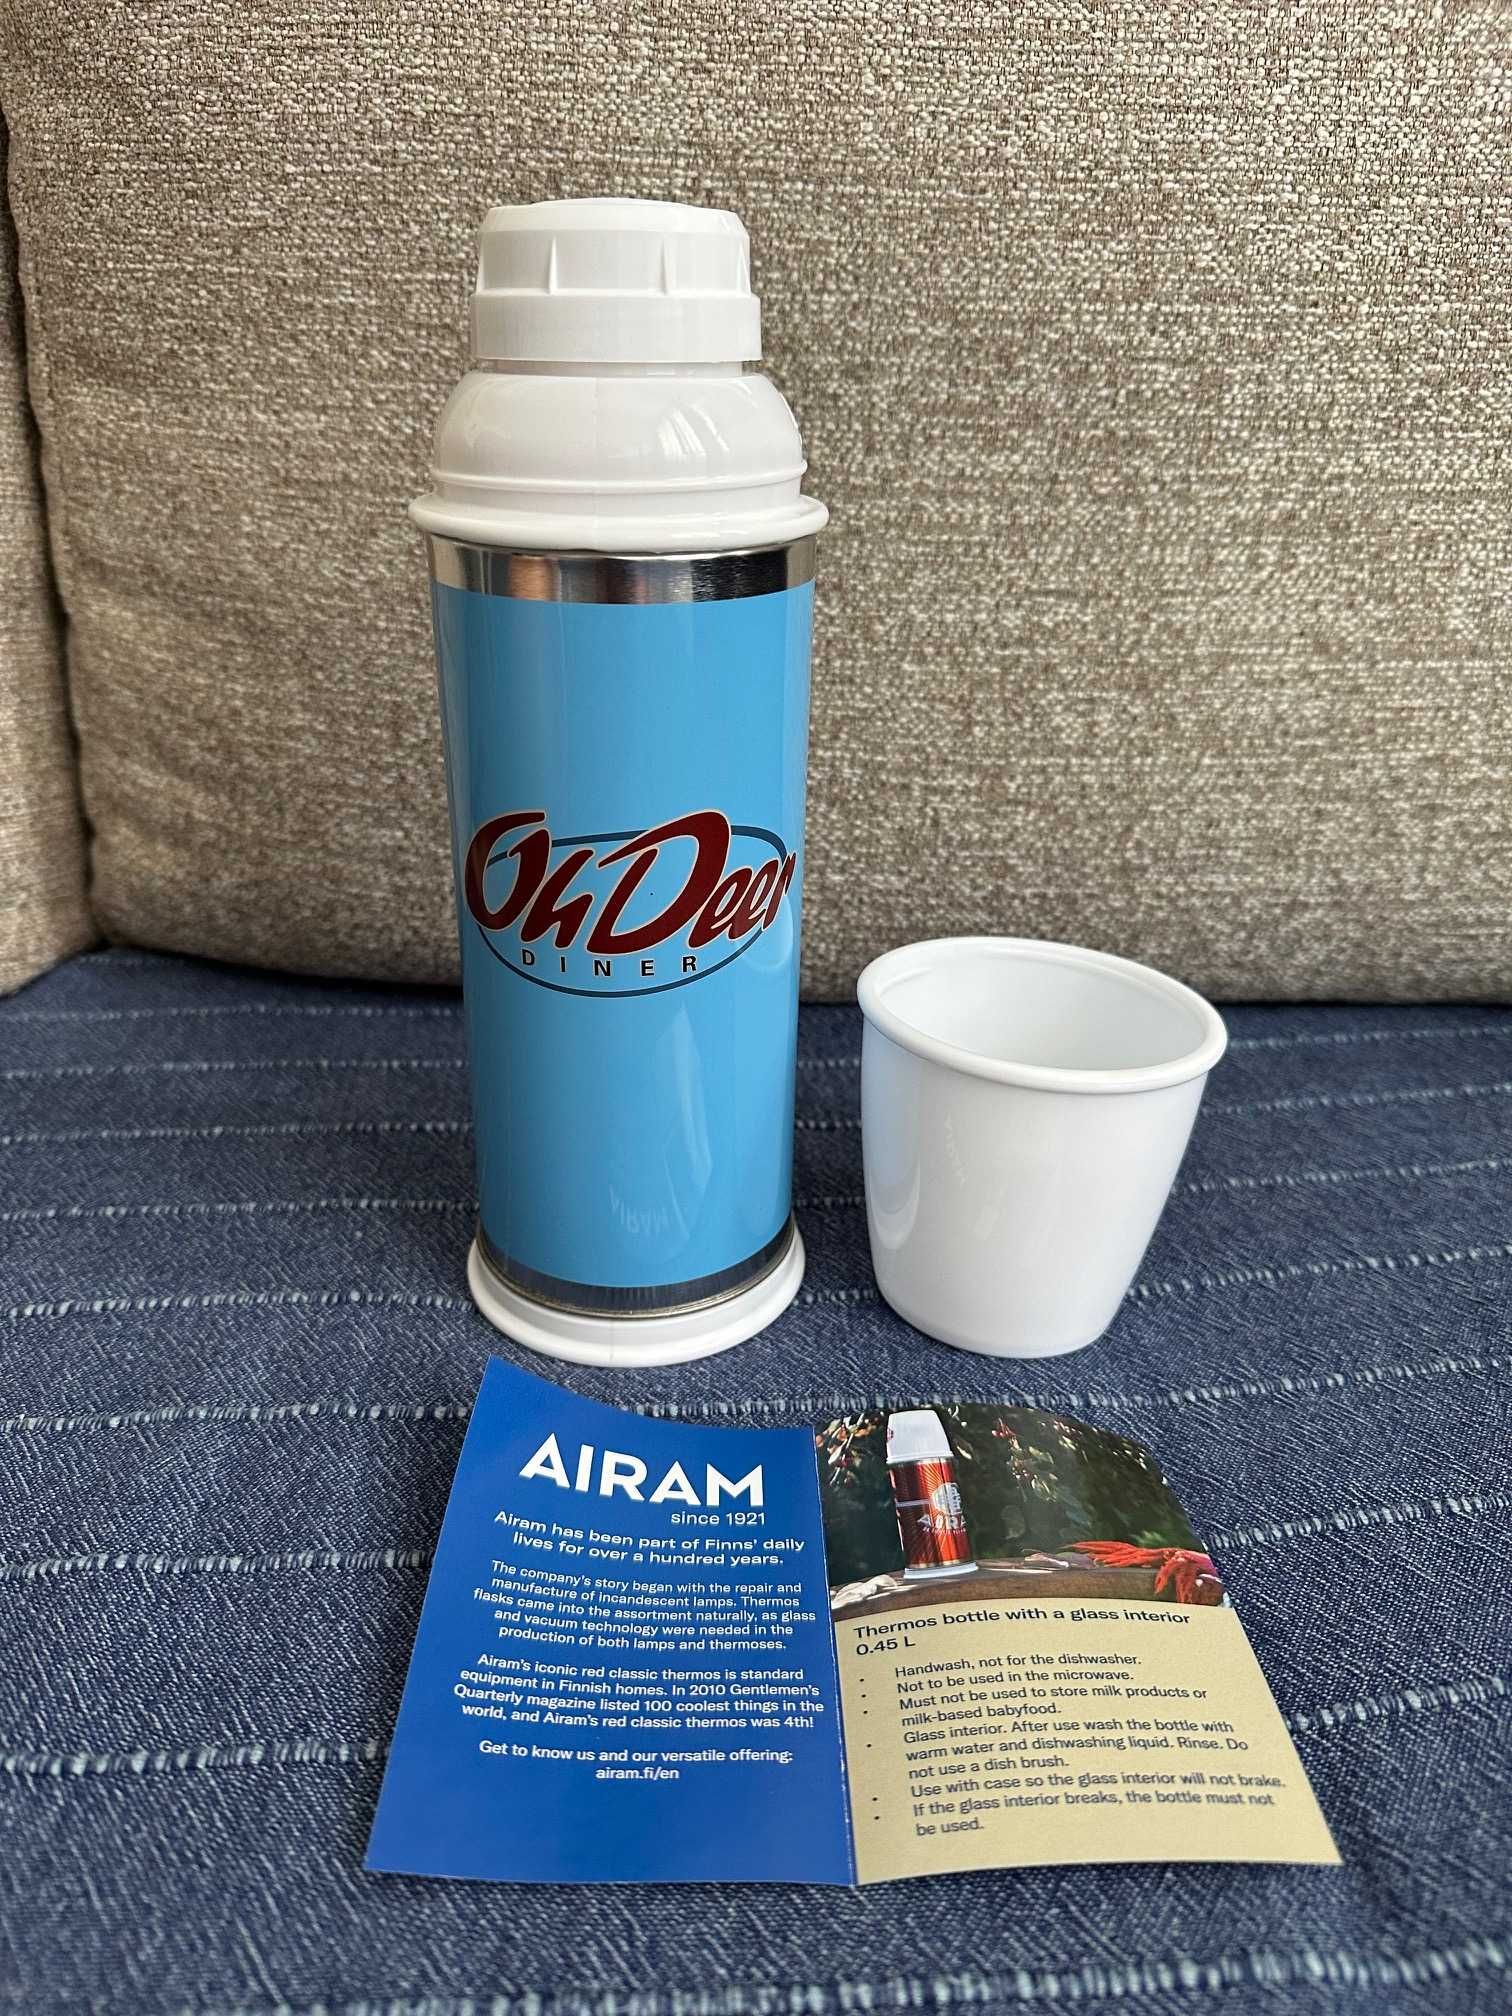 Oh Deer Diner Thermos by Airam (Alan Wake II) - Limited Edition